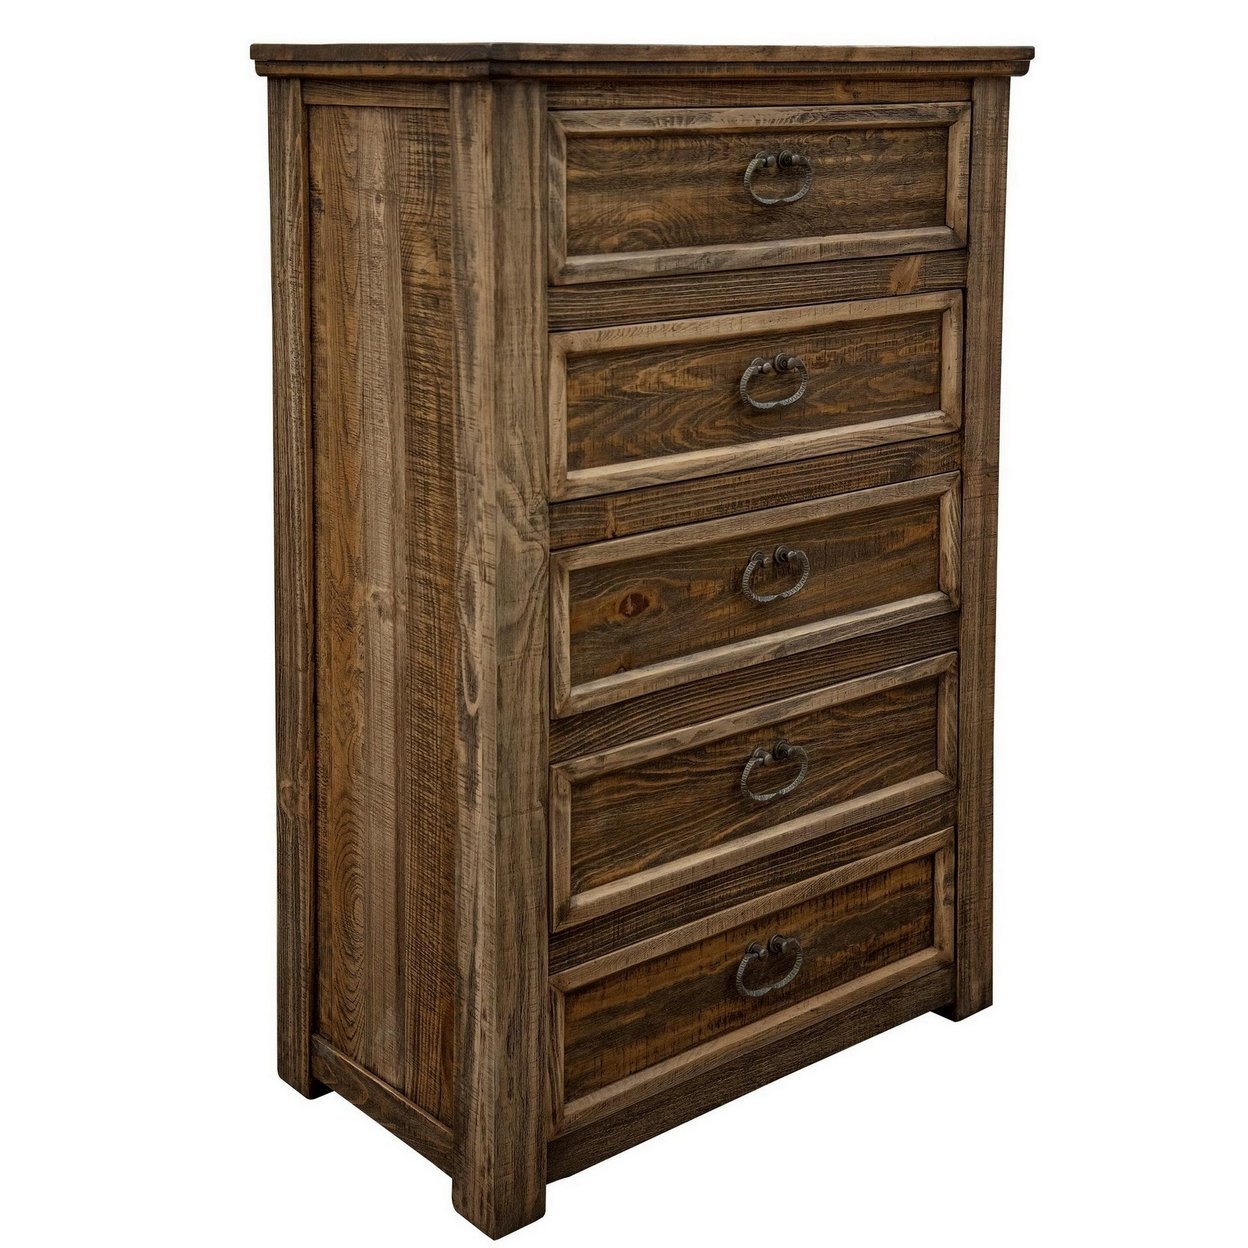 Maze 52 Inch 5 Drawer Chest With Lacquered Finish, Solid Pine Wood, Brown- Saltoro Sherpi